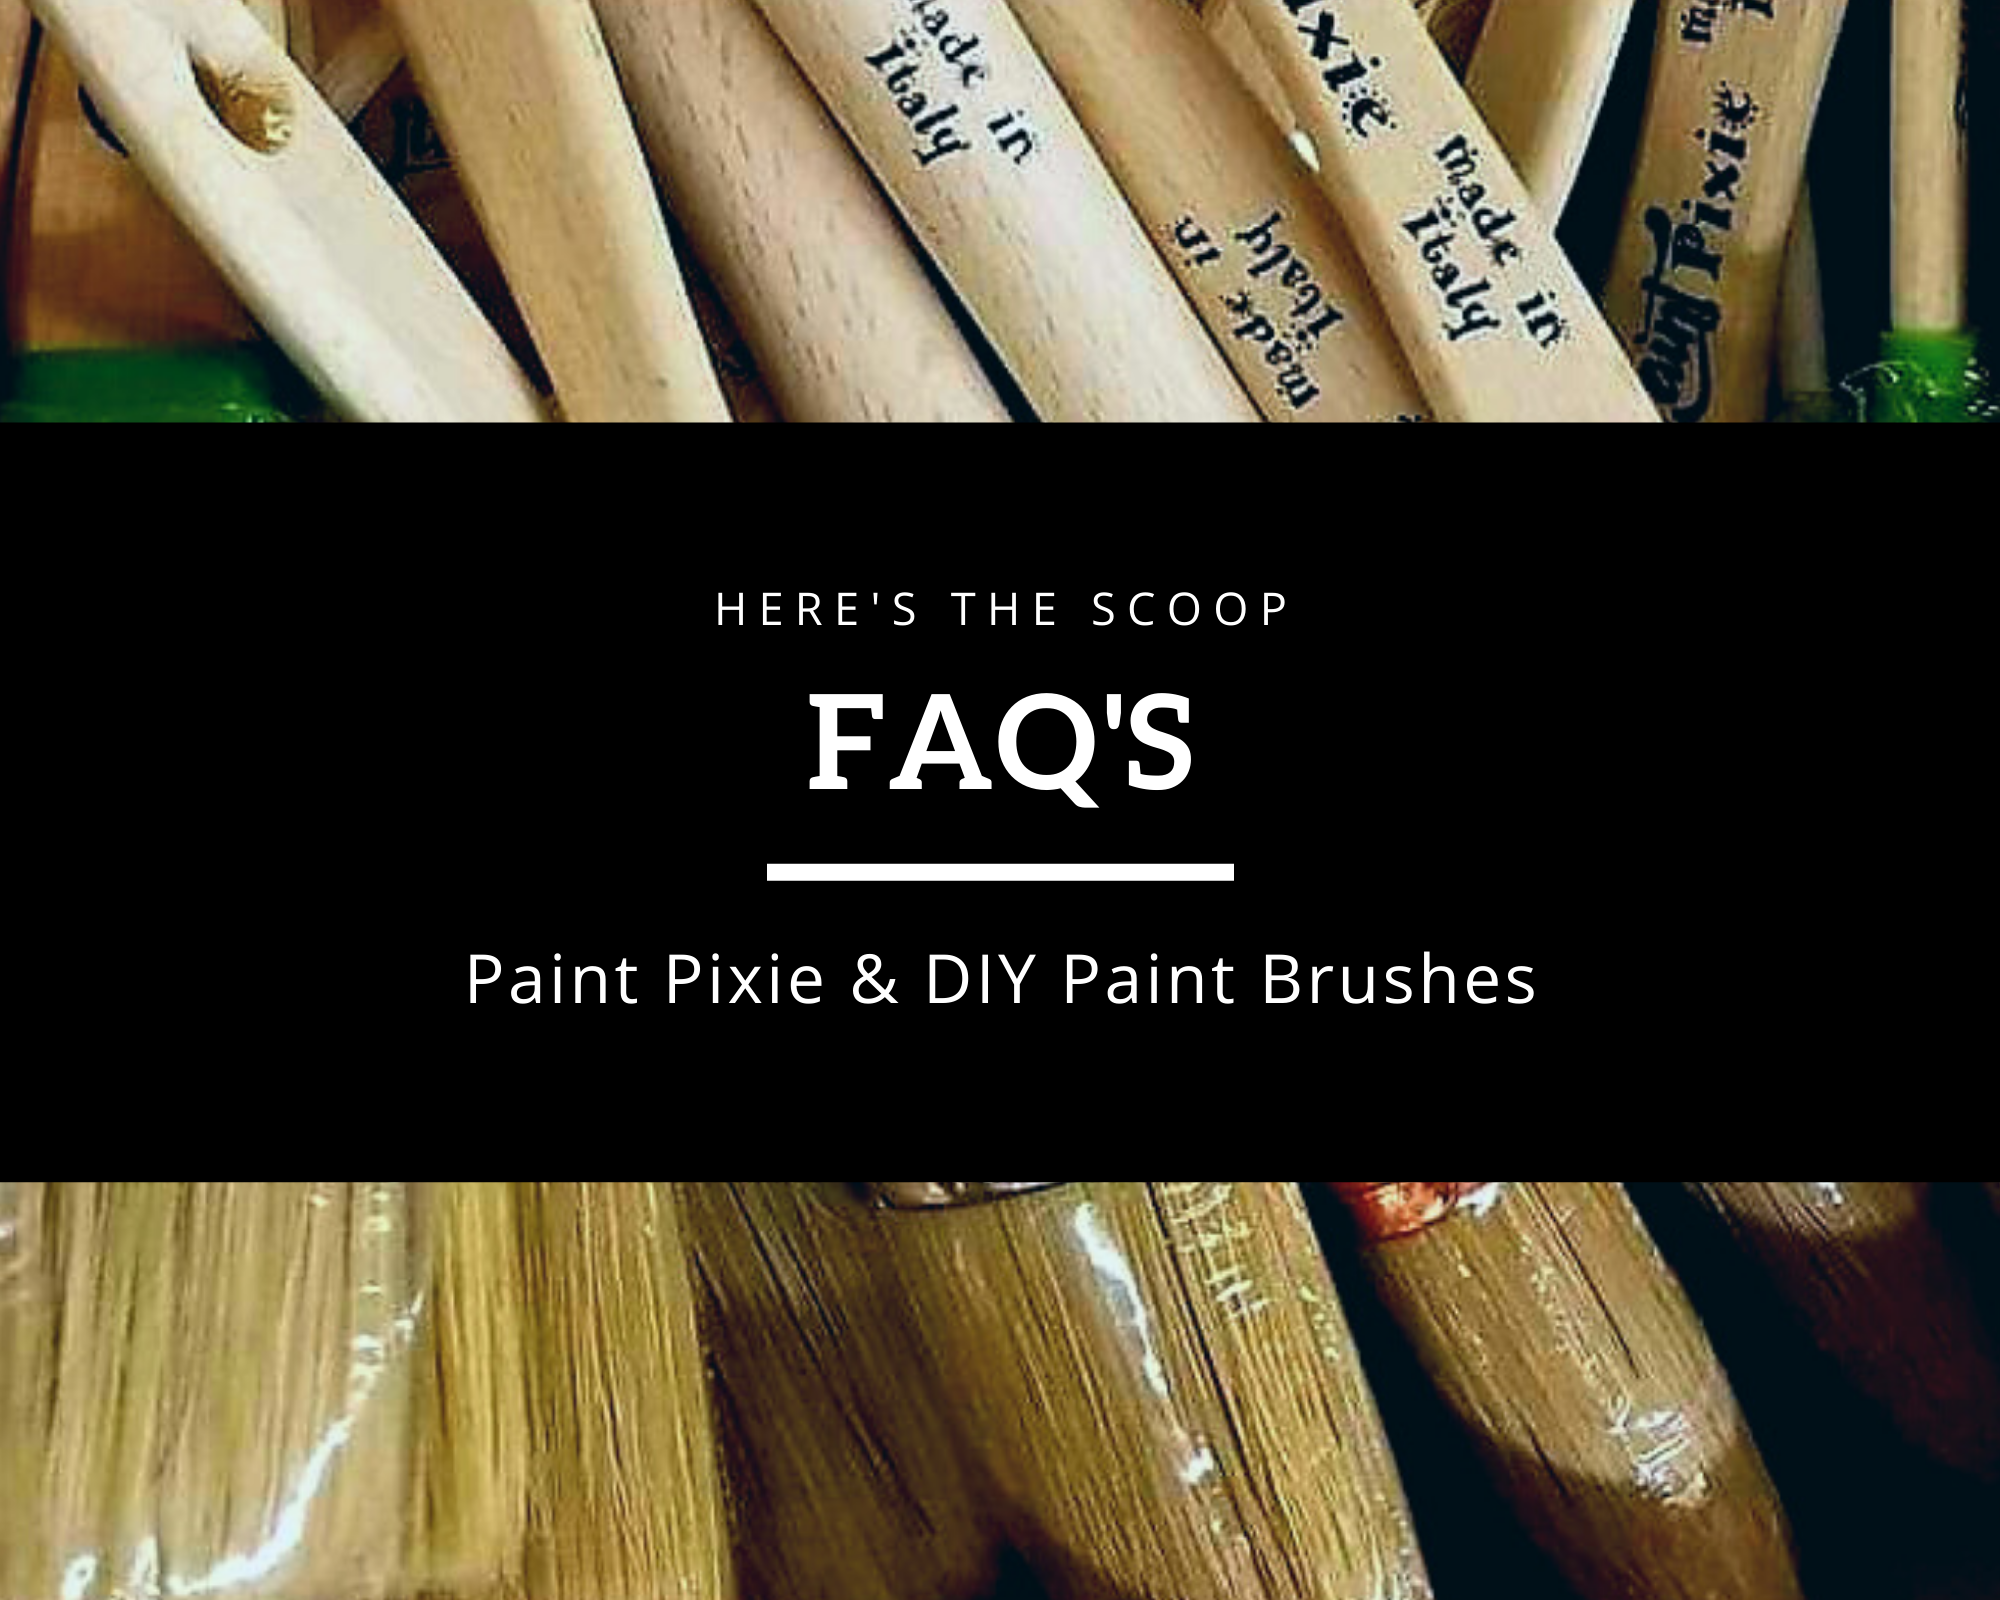 Paint Pixie & DIY Brushes Frequently Asked Questions